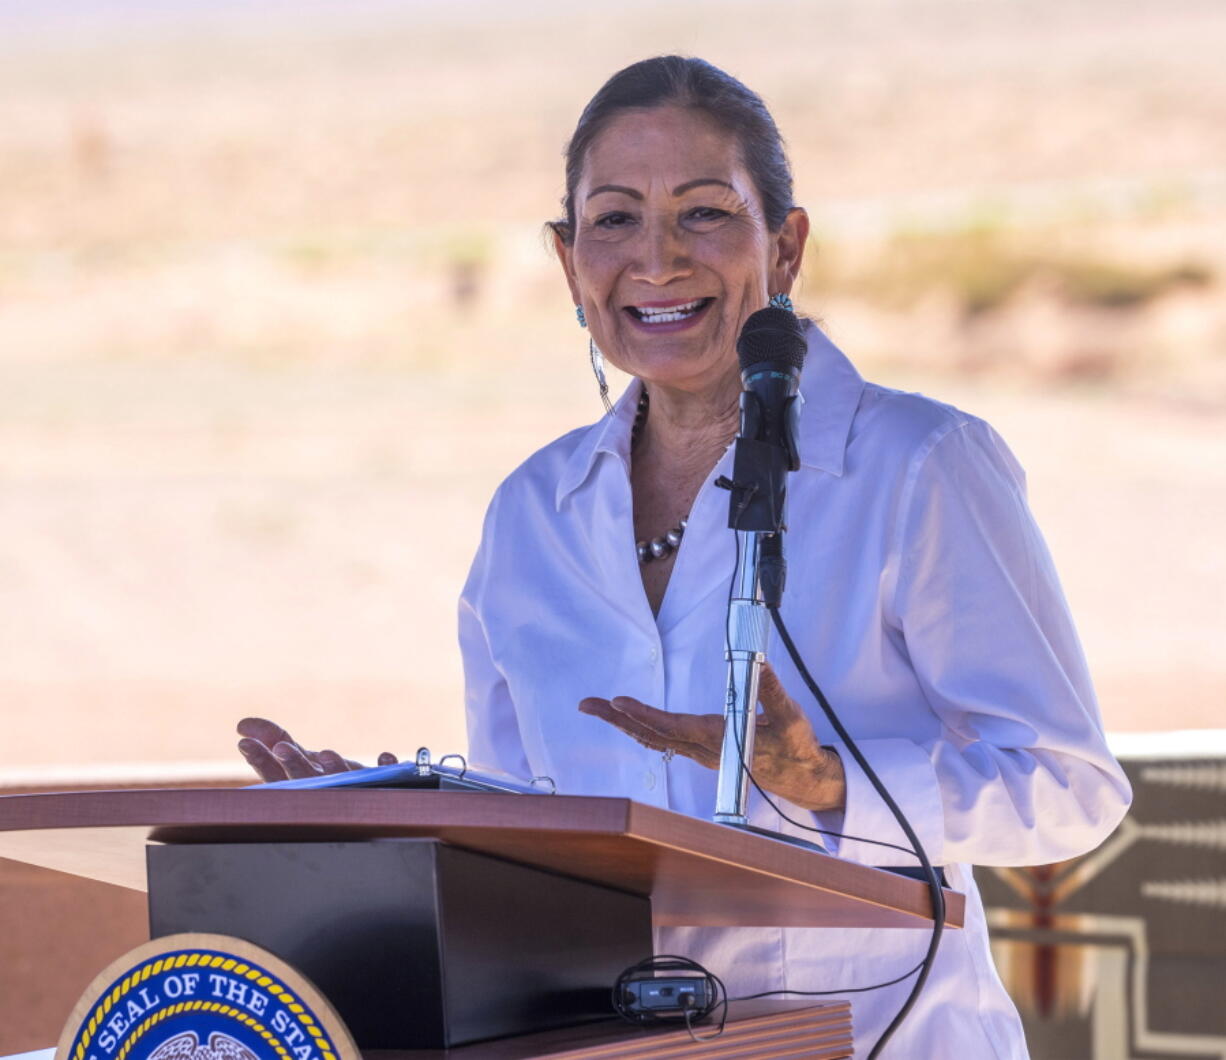 FILE - U.S. Secretary of the Interior Deb Haaland speaks after signing the agreement for the Navajo federal reserved water rights settlement at Monument Valley, Utah on Friday, May 27, 2022. Interior Secretary Deb Haaland on Thursday, June 16, 2022 announced $9 million for 40 projects in Idaho and seven other Western states for sagebrush ecosystems to combat invasive species and wildfire, reduce the spread of juniper trees and promote community and economic stability.